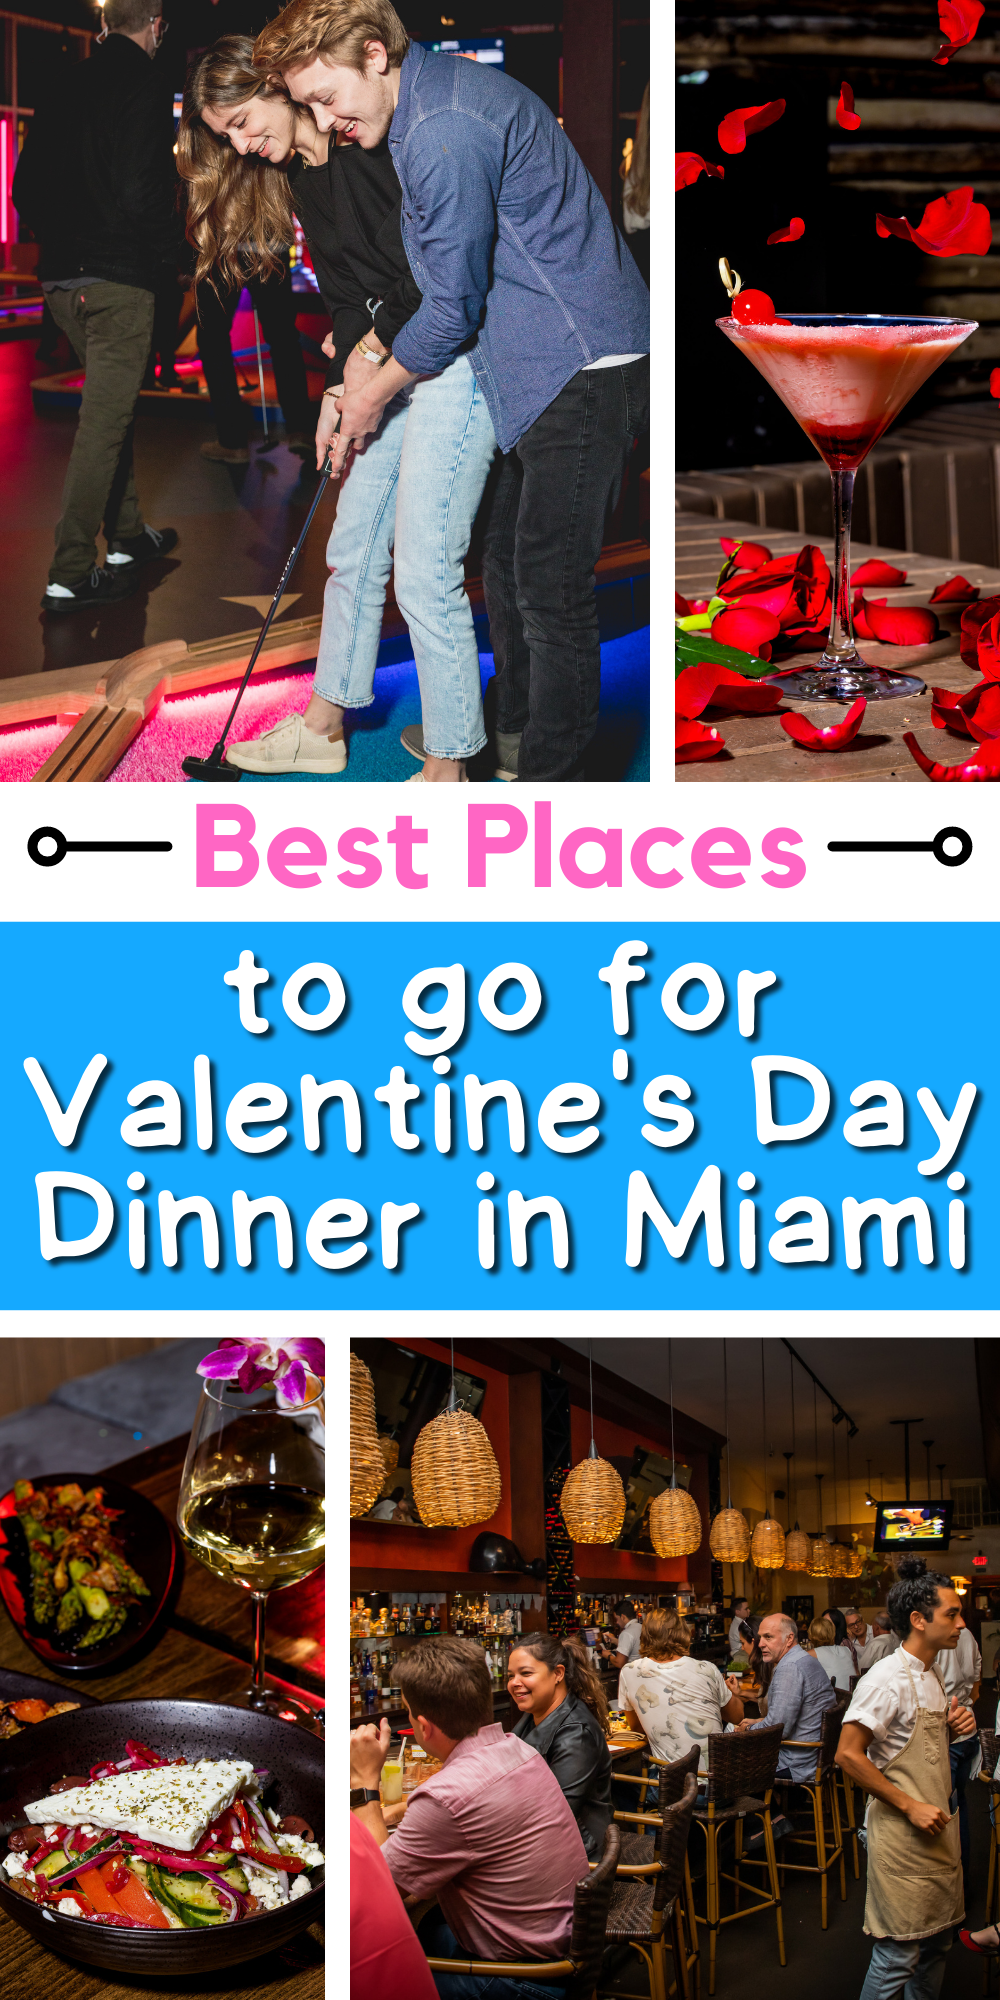 Best Places to go for Valentine's Day in Miami